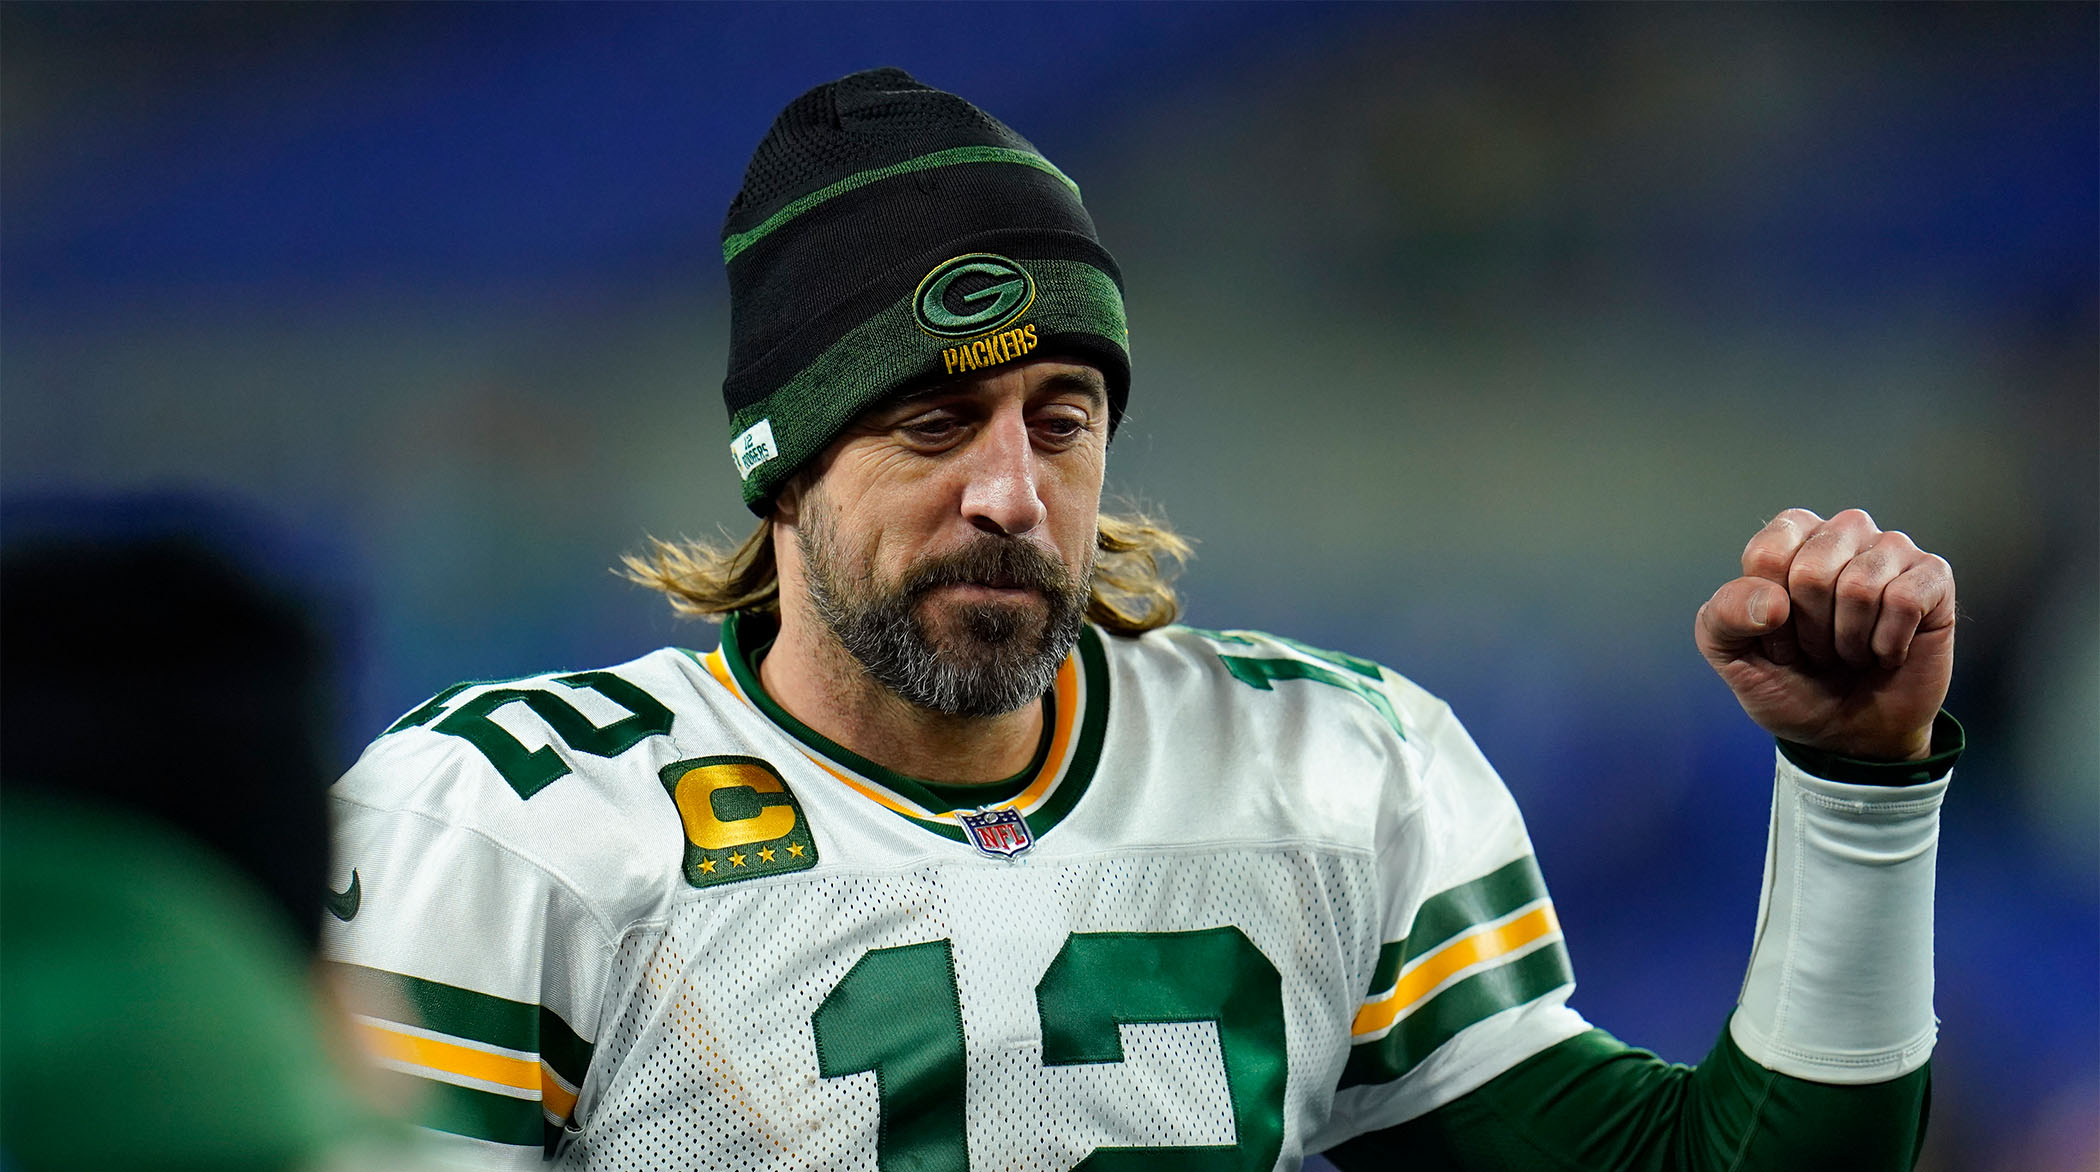 Aaron Rodgers comments about potential retirement after this season